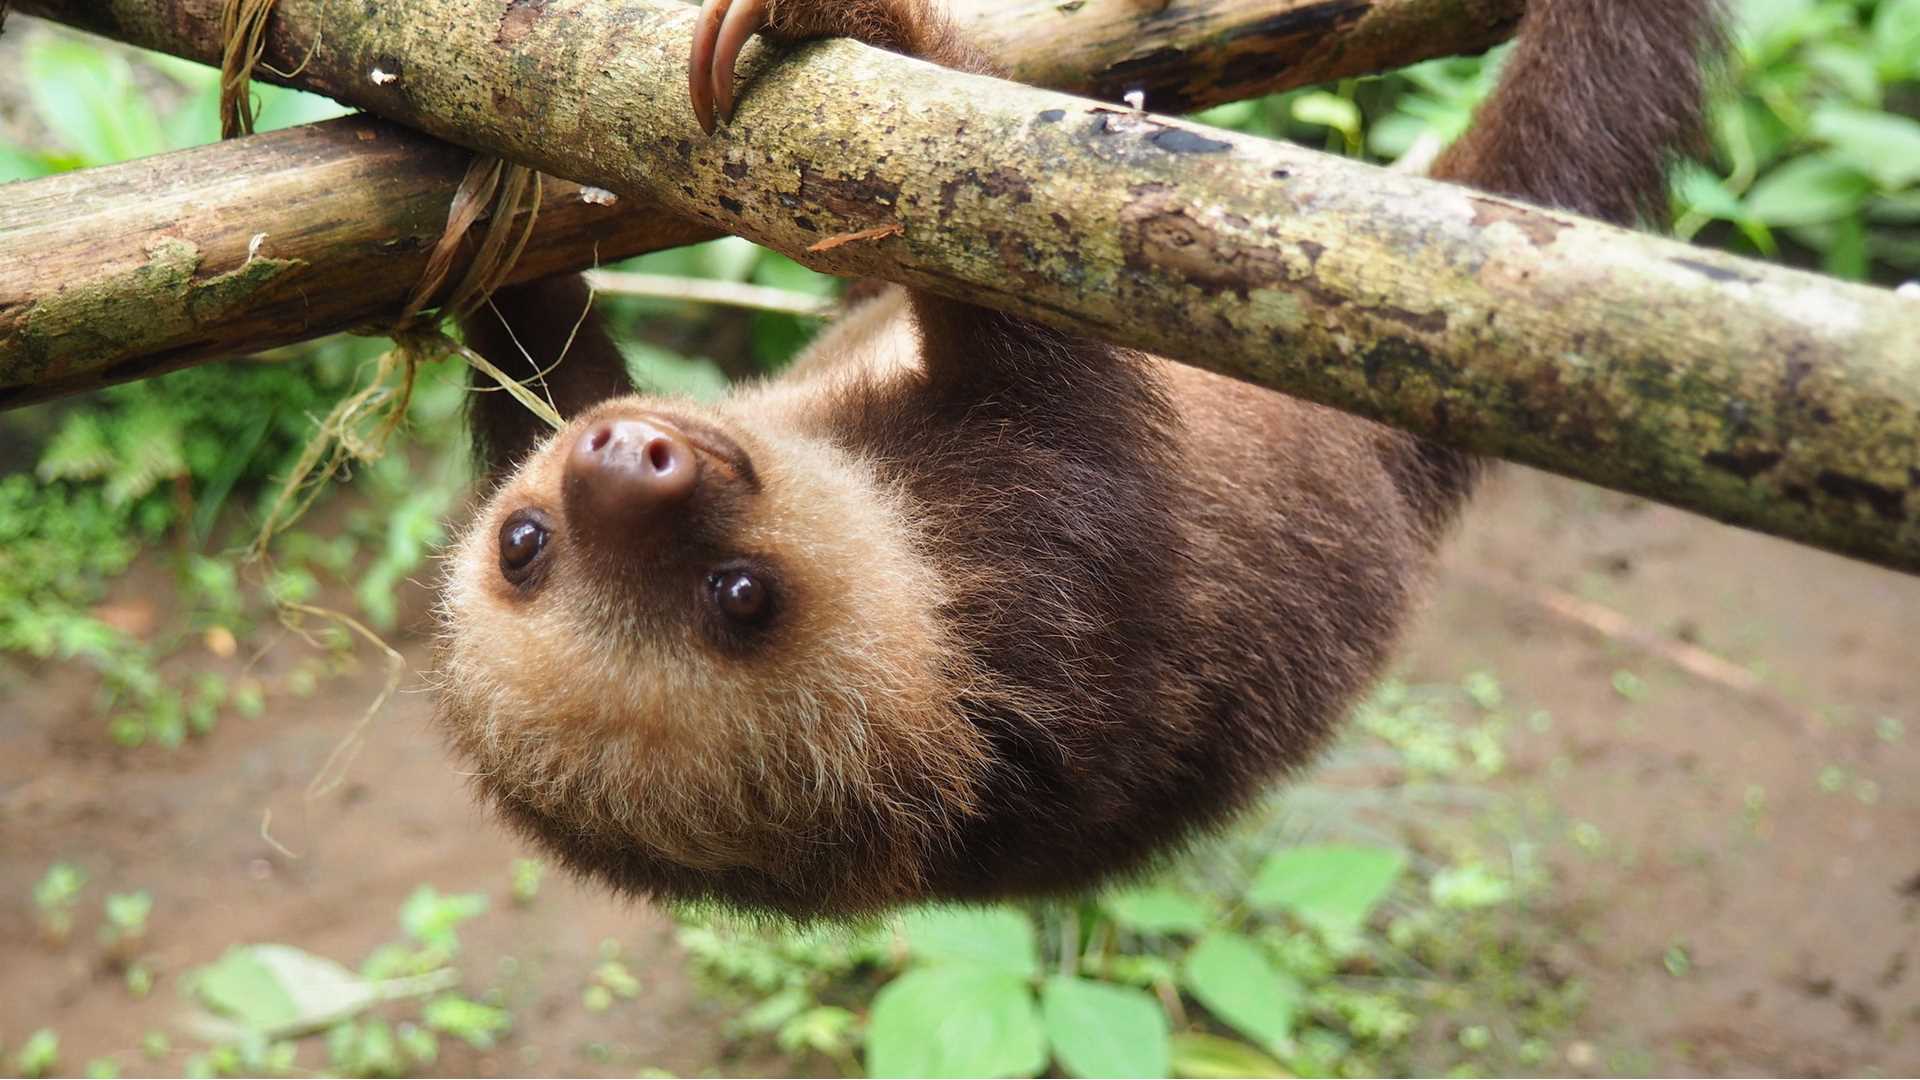 A baby sloth hanging upside down from a branch